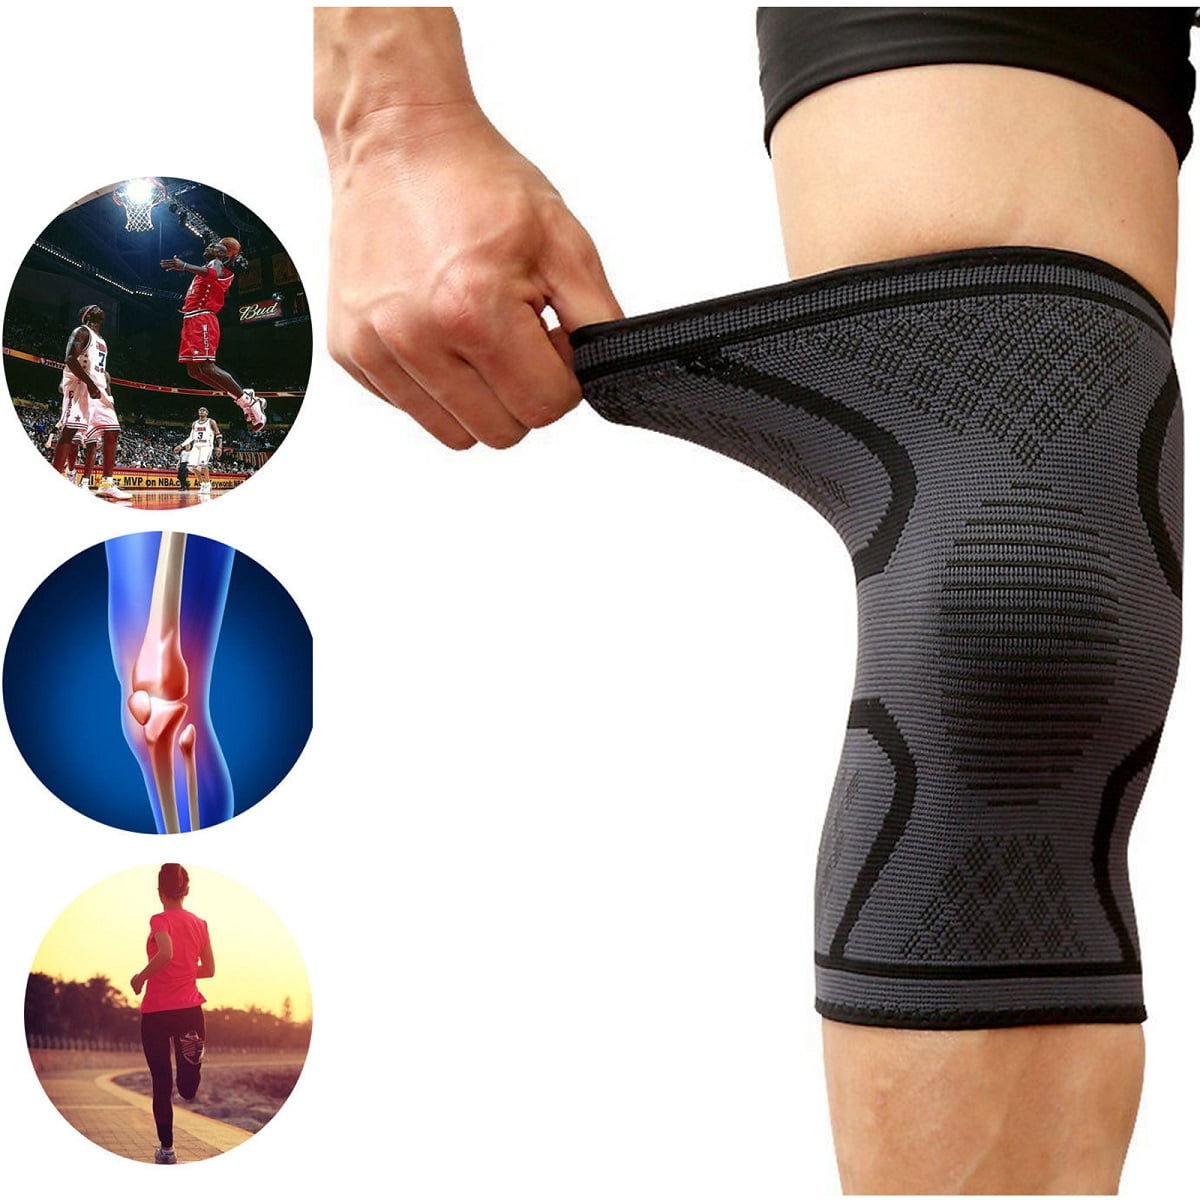 2 X Knee Sleeve Compression Brace Copper Support Fit Sports Joint Pain Arthritis 